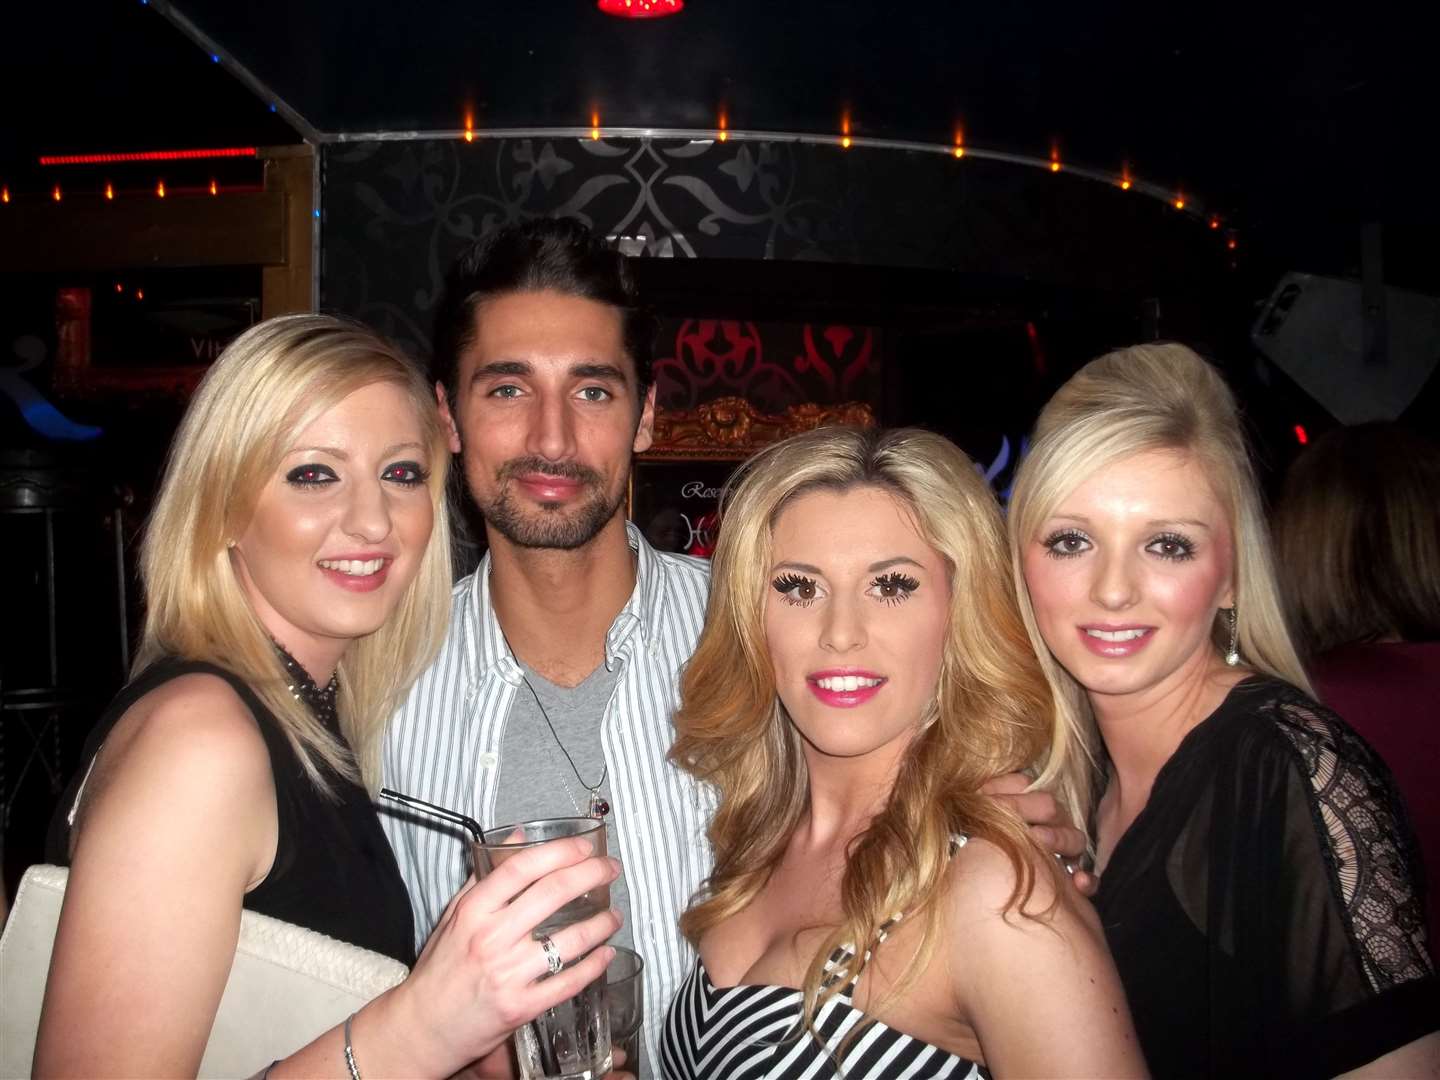 Made in Chelsea star Hugo Taylor meets fans at Strawberry Moons nightclub in Maidstone in 2012. Picture: Rik Johnson